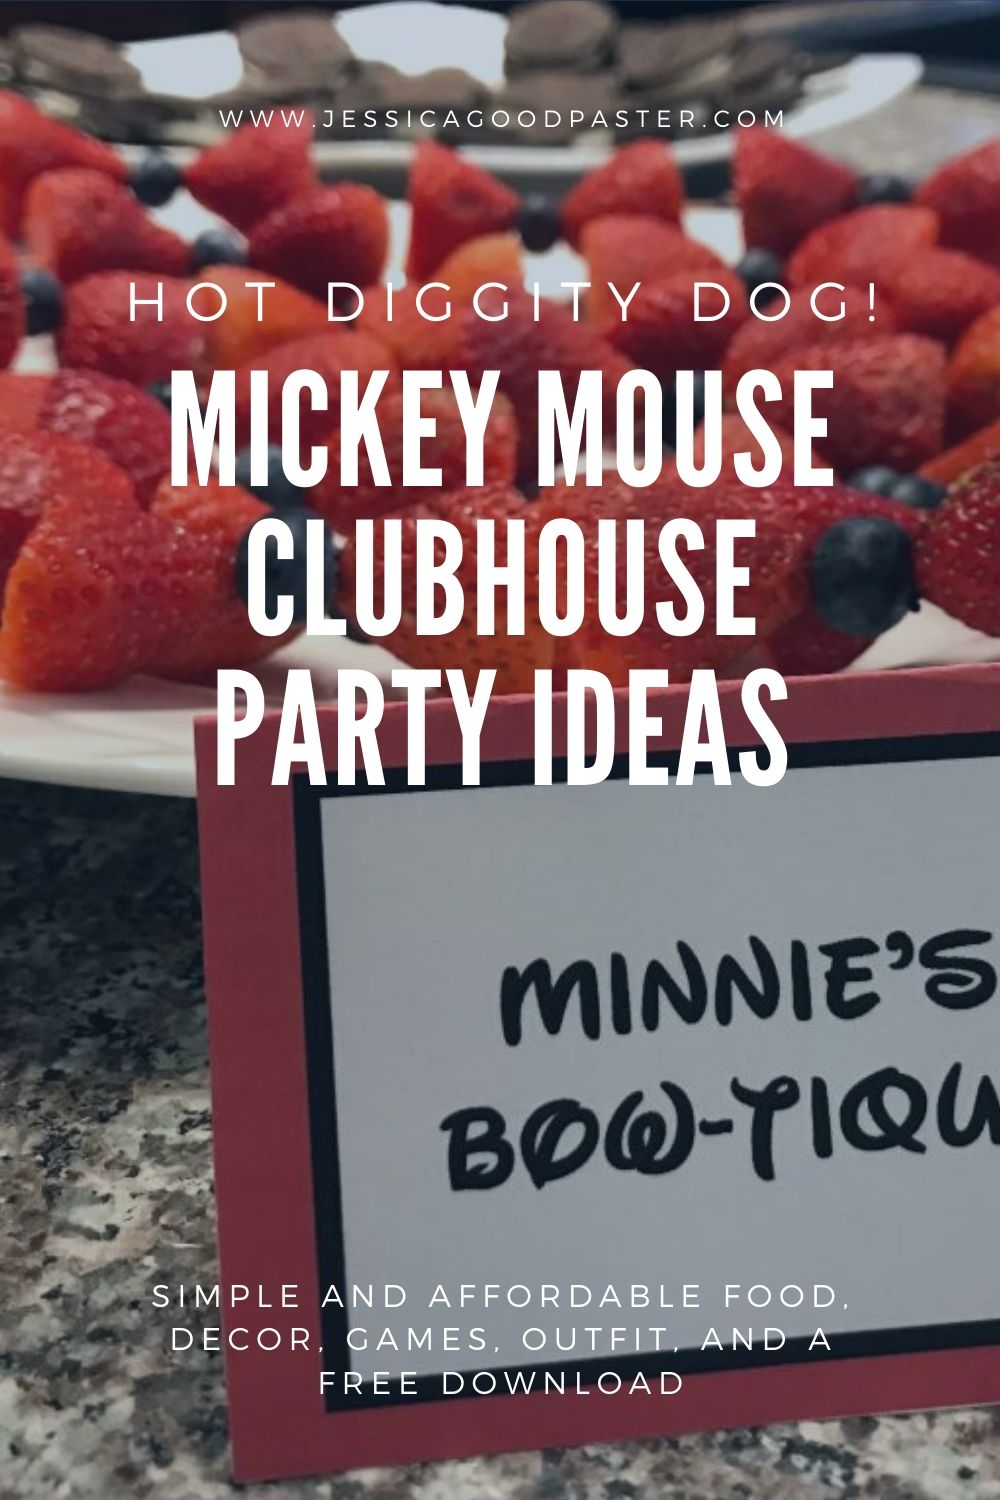 How to Host an Amazing Mickey Mouse Party on a Budget | Minnie's Bow-tique Fruit Bows | Tons of affordable options for Mickey or Minnie parties including food ideas, decorations, outfits, games, party supplies, and free printables! Your Mickey Mouse Clubhouse fan will have a great birthday ! #mickeyparty #mickeymouse #mickeymouseparty #minnieparty #birthday #mickeymouseclubhouse #mickeyprintables